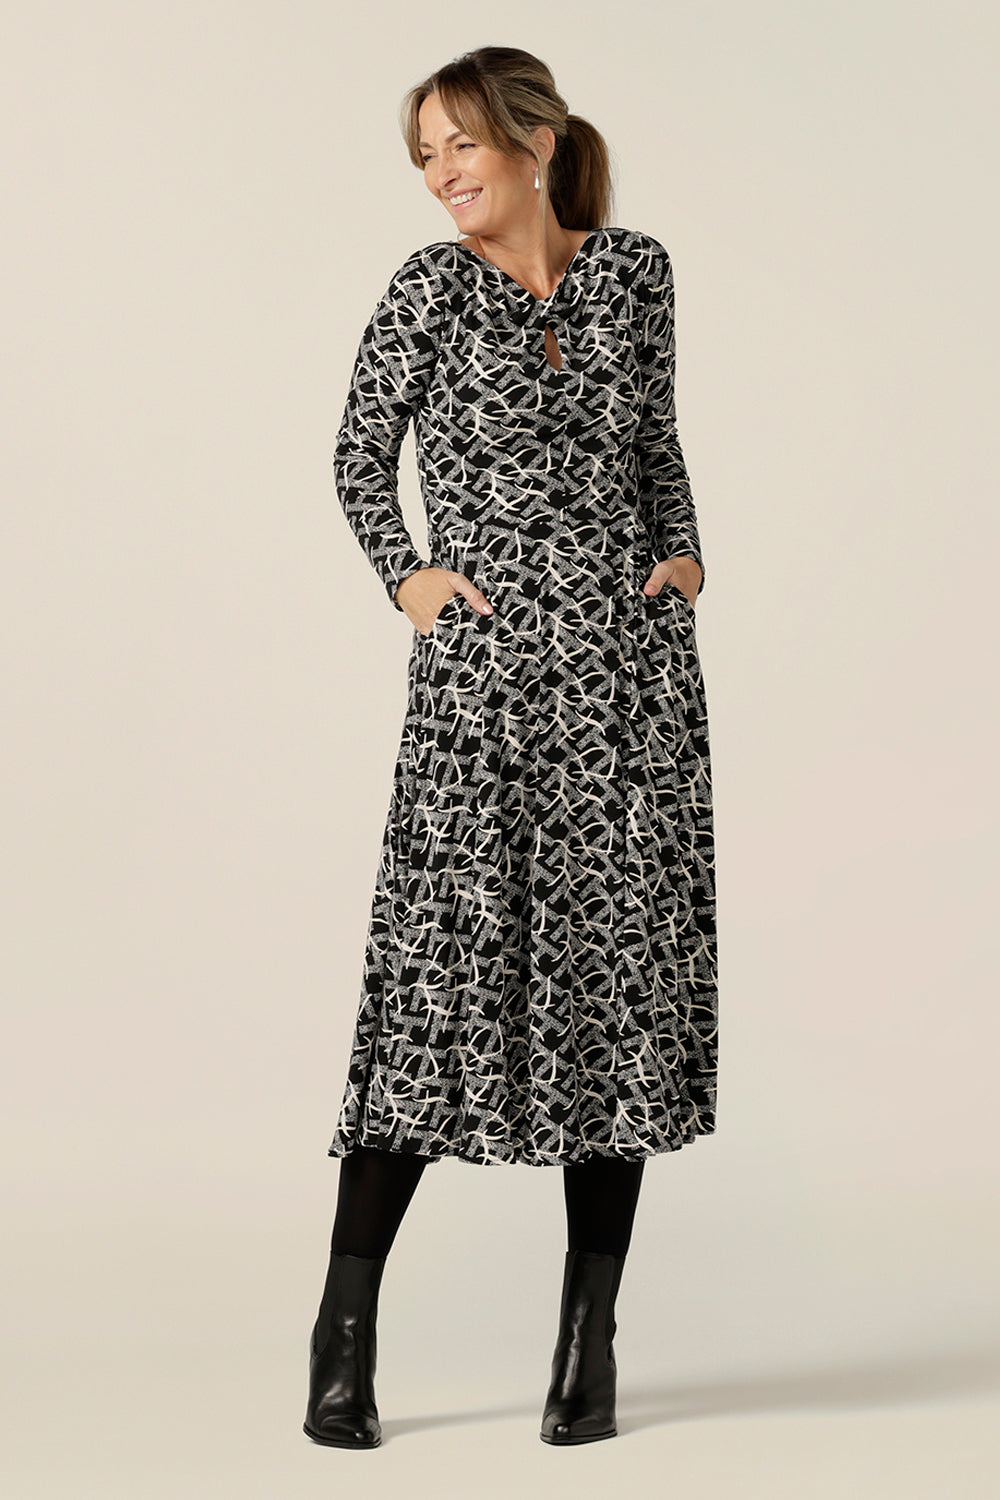 A size 10 woman wears a midi length, long sleeve dress with twisted keyhole detail. Made by Australian and New Zealand women's fashion brand, L&F in an inclusive size range of sizes 8 to 24. Shop this dress for work